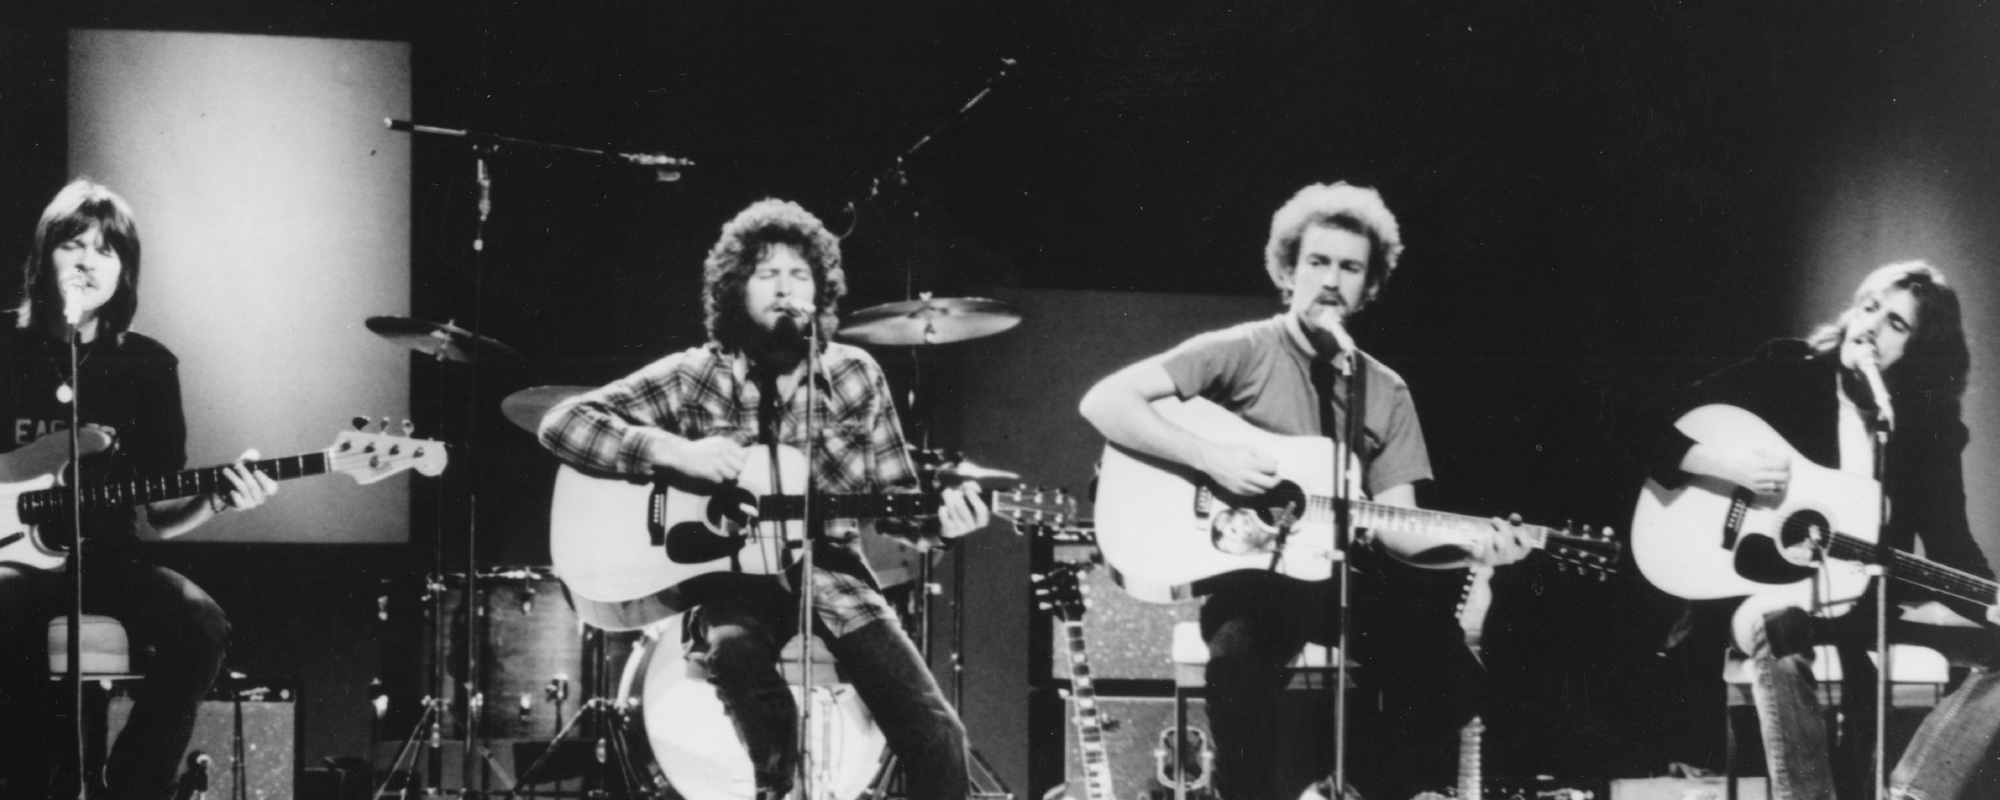 3 Eagles Songs With the Most Inspirational Life Lessons